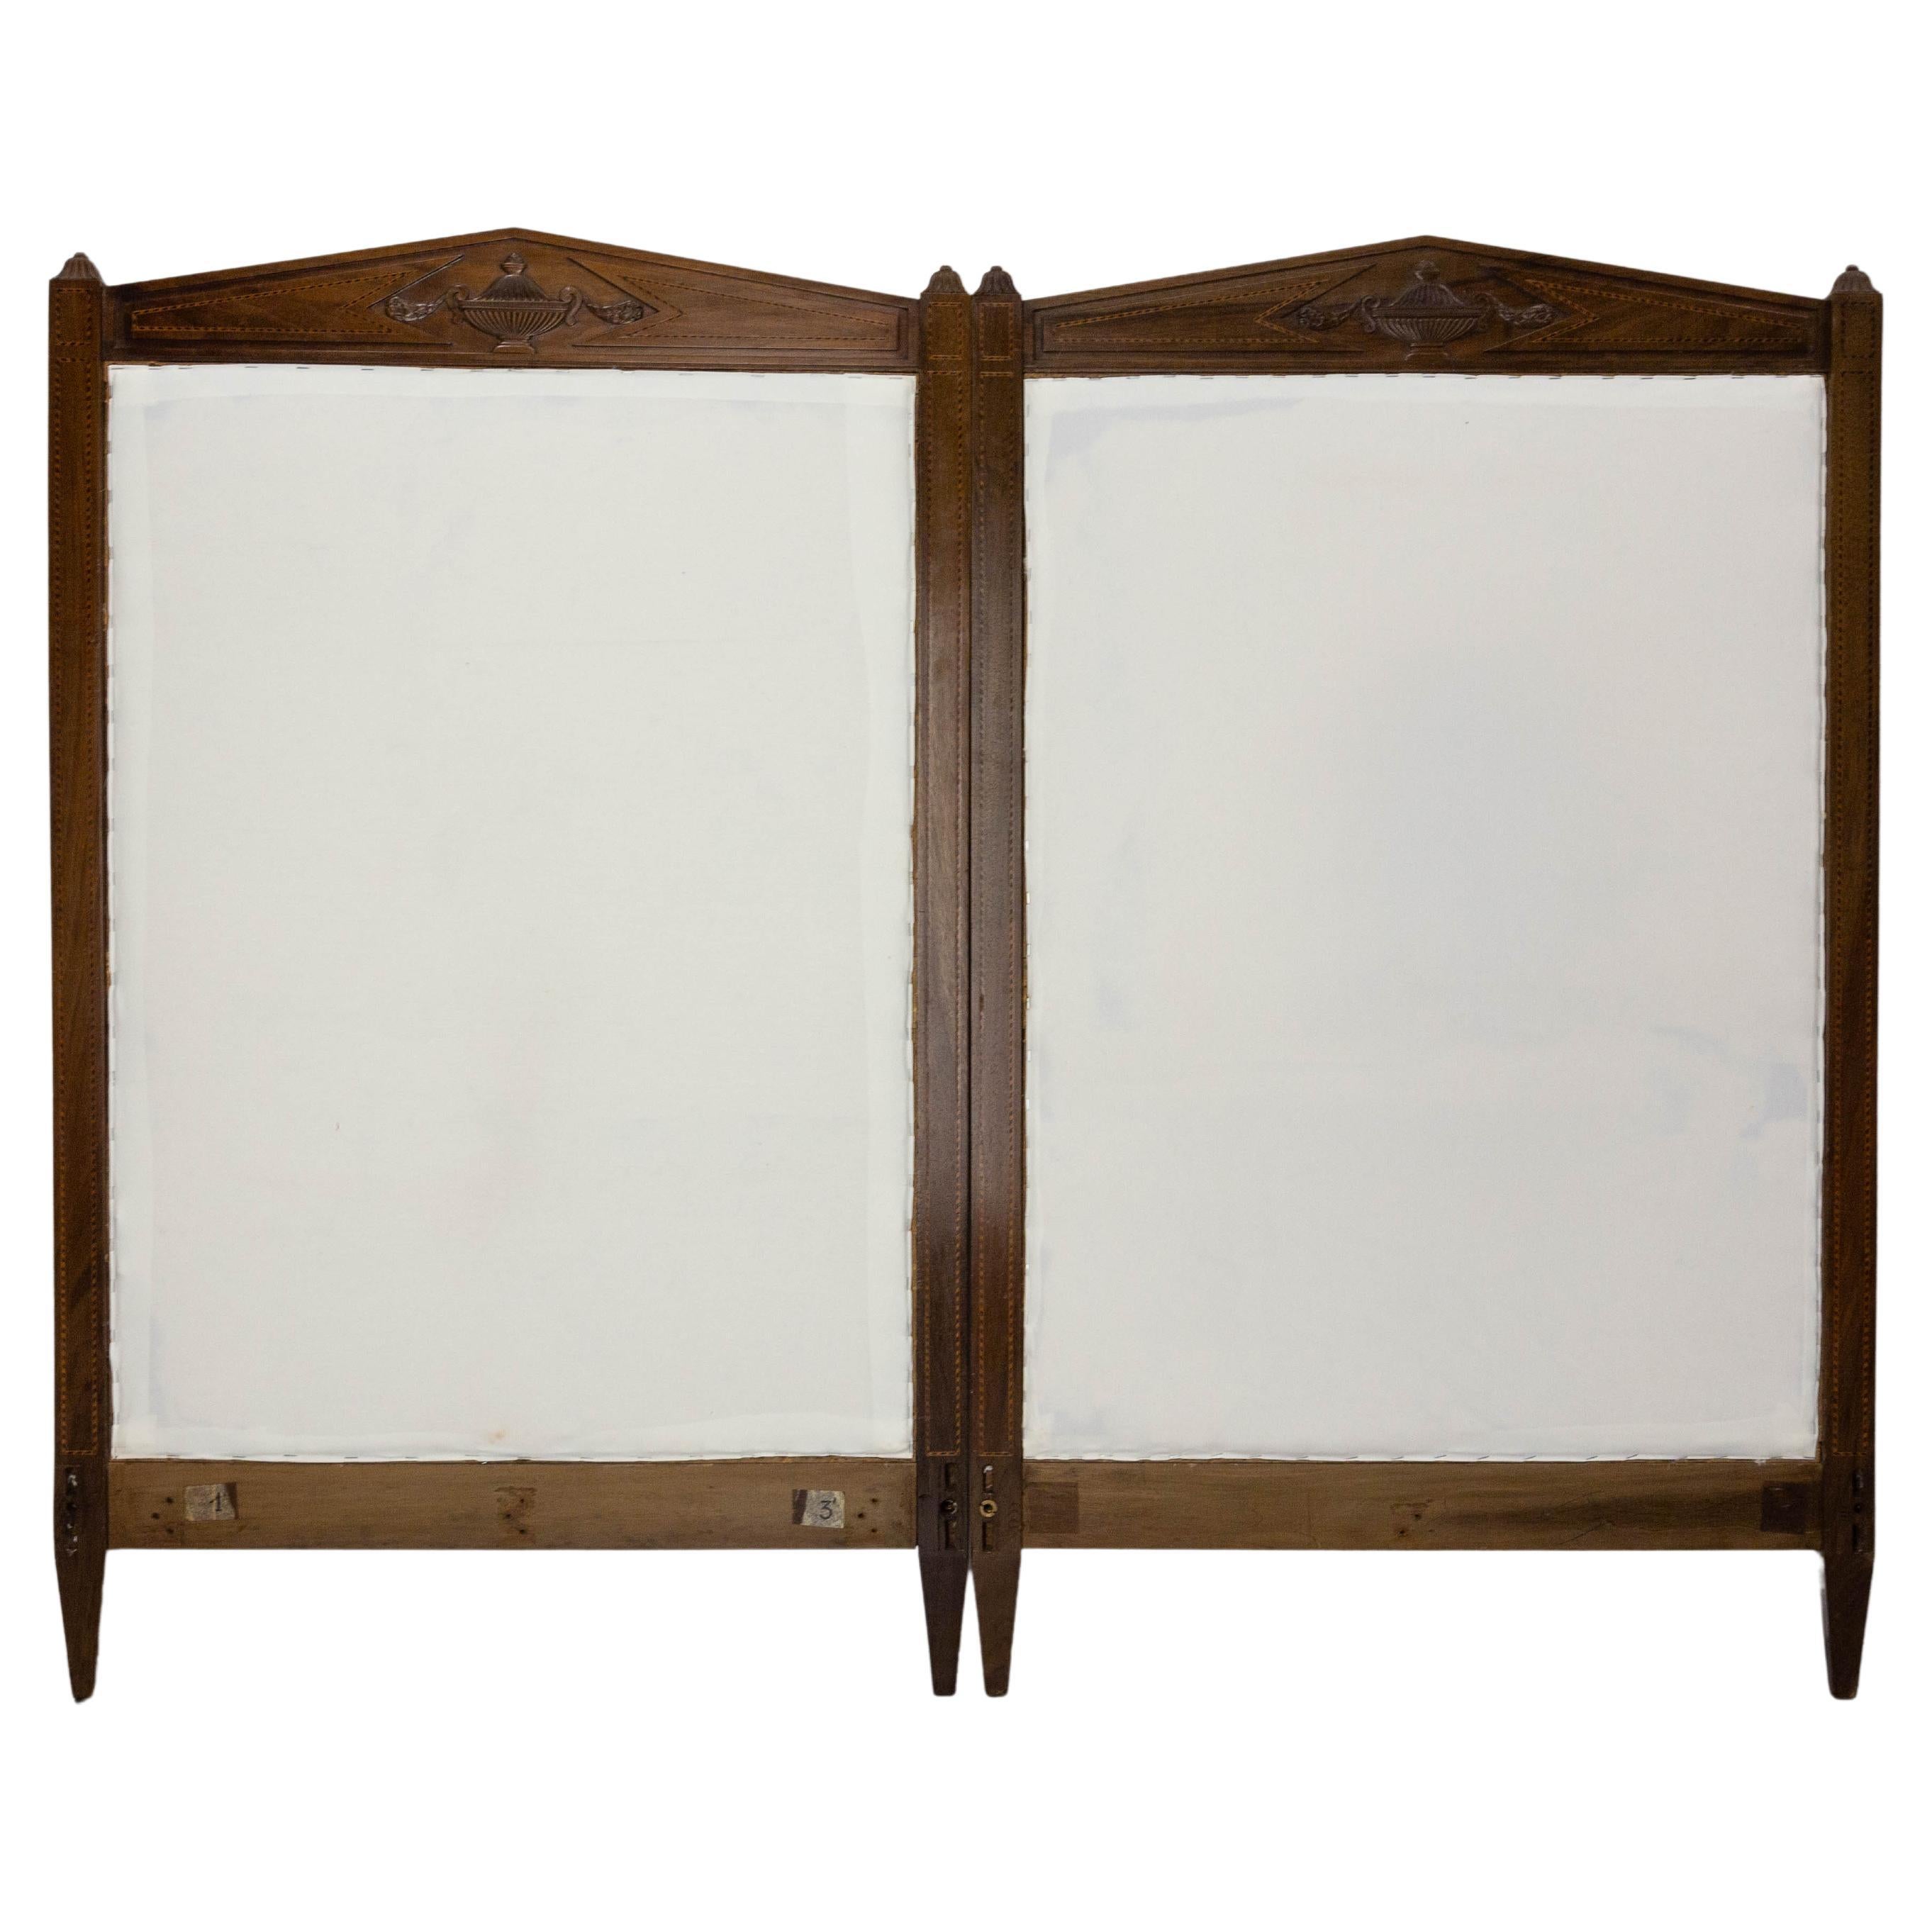 French Walnut Pair of Headboards with Marquetry Directoire Period, 1800 For Sale